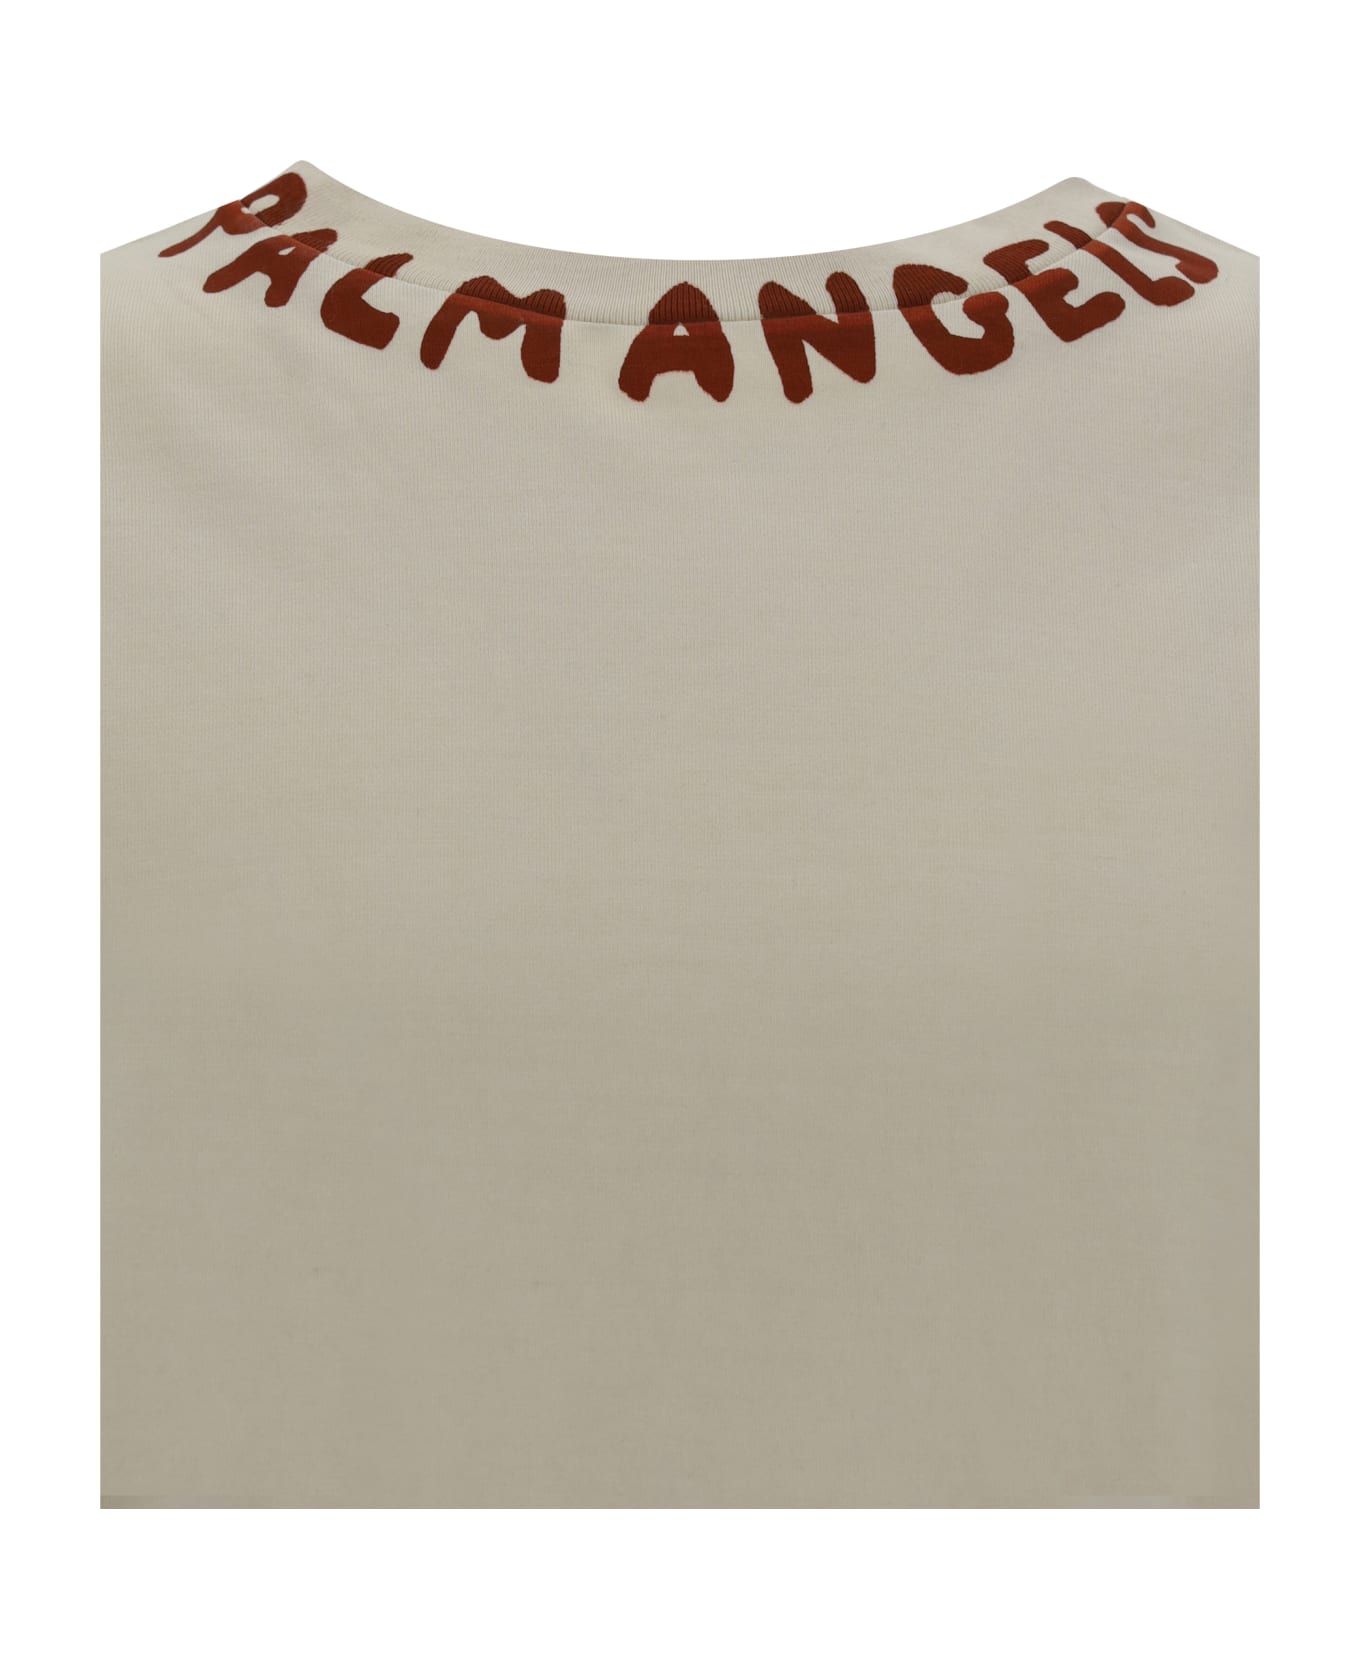 Palm Angels T-shirt With Seasonal Logo - Off White Red シャツ